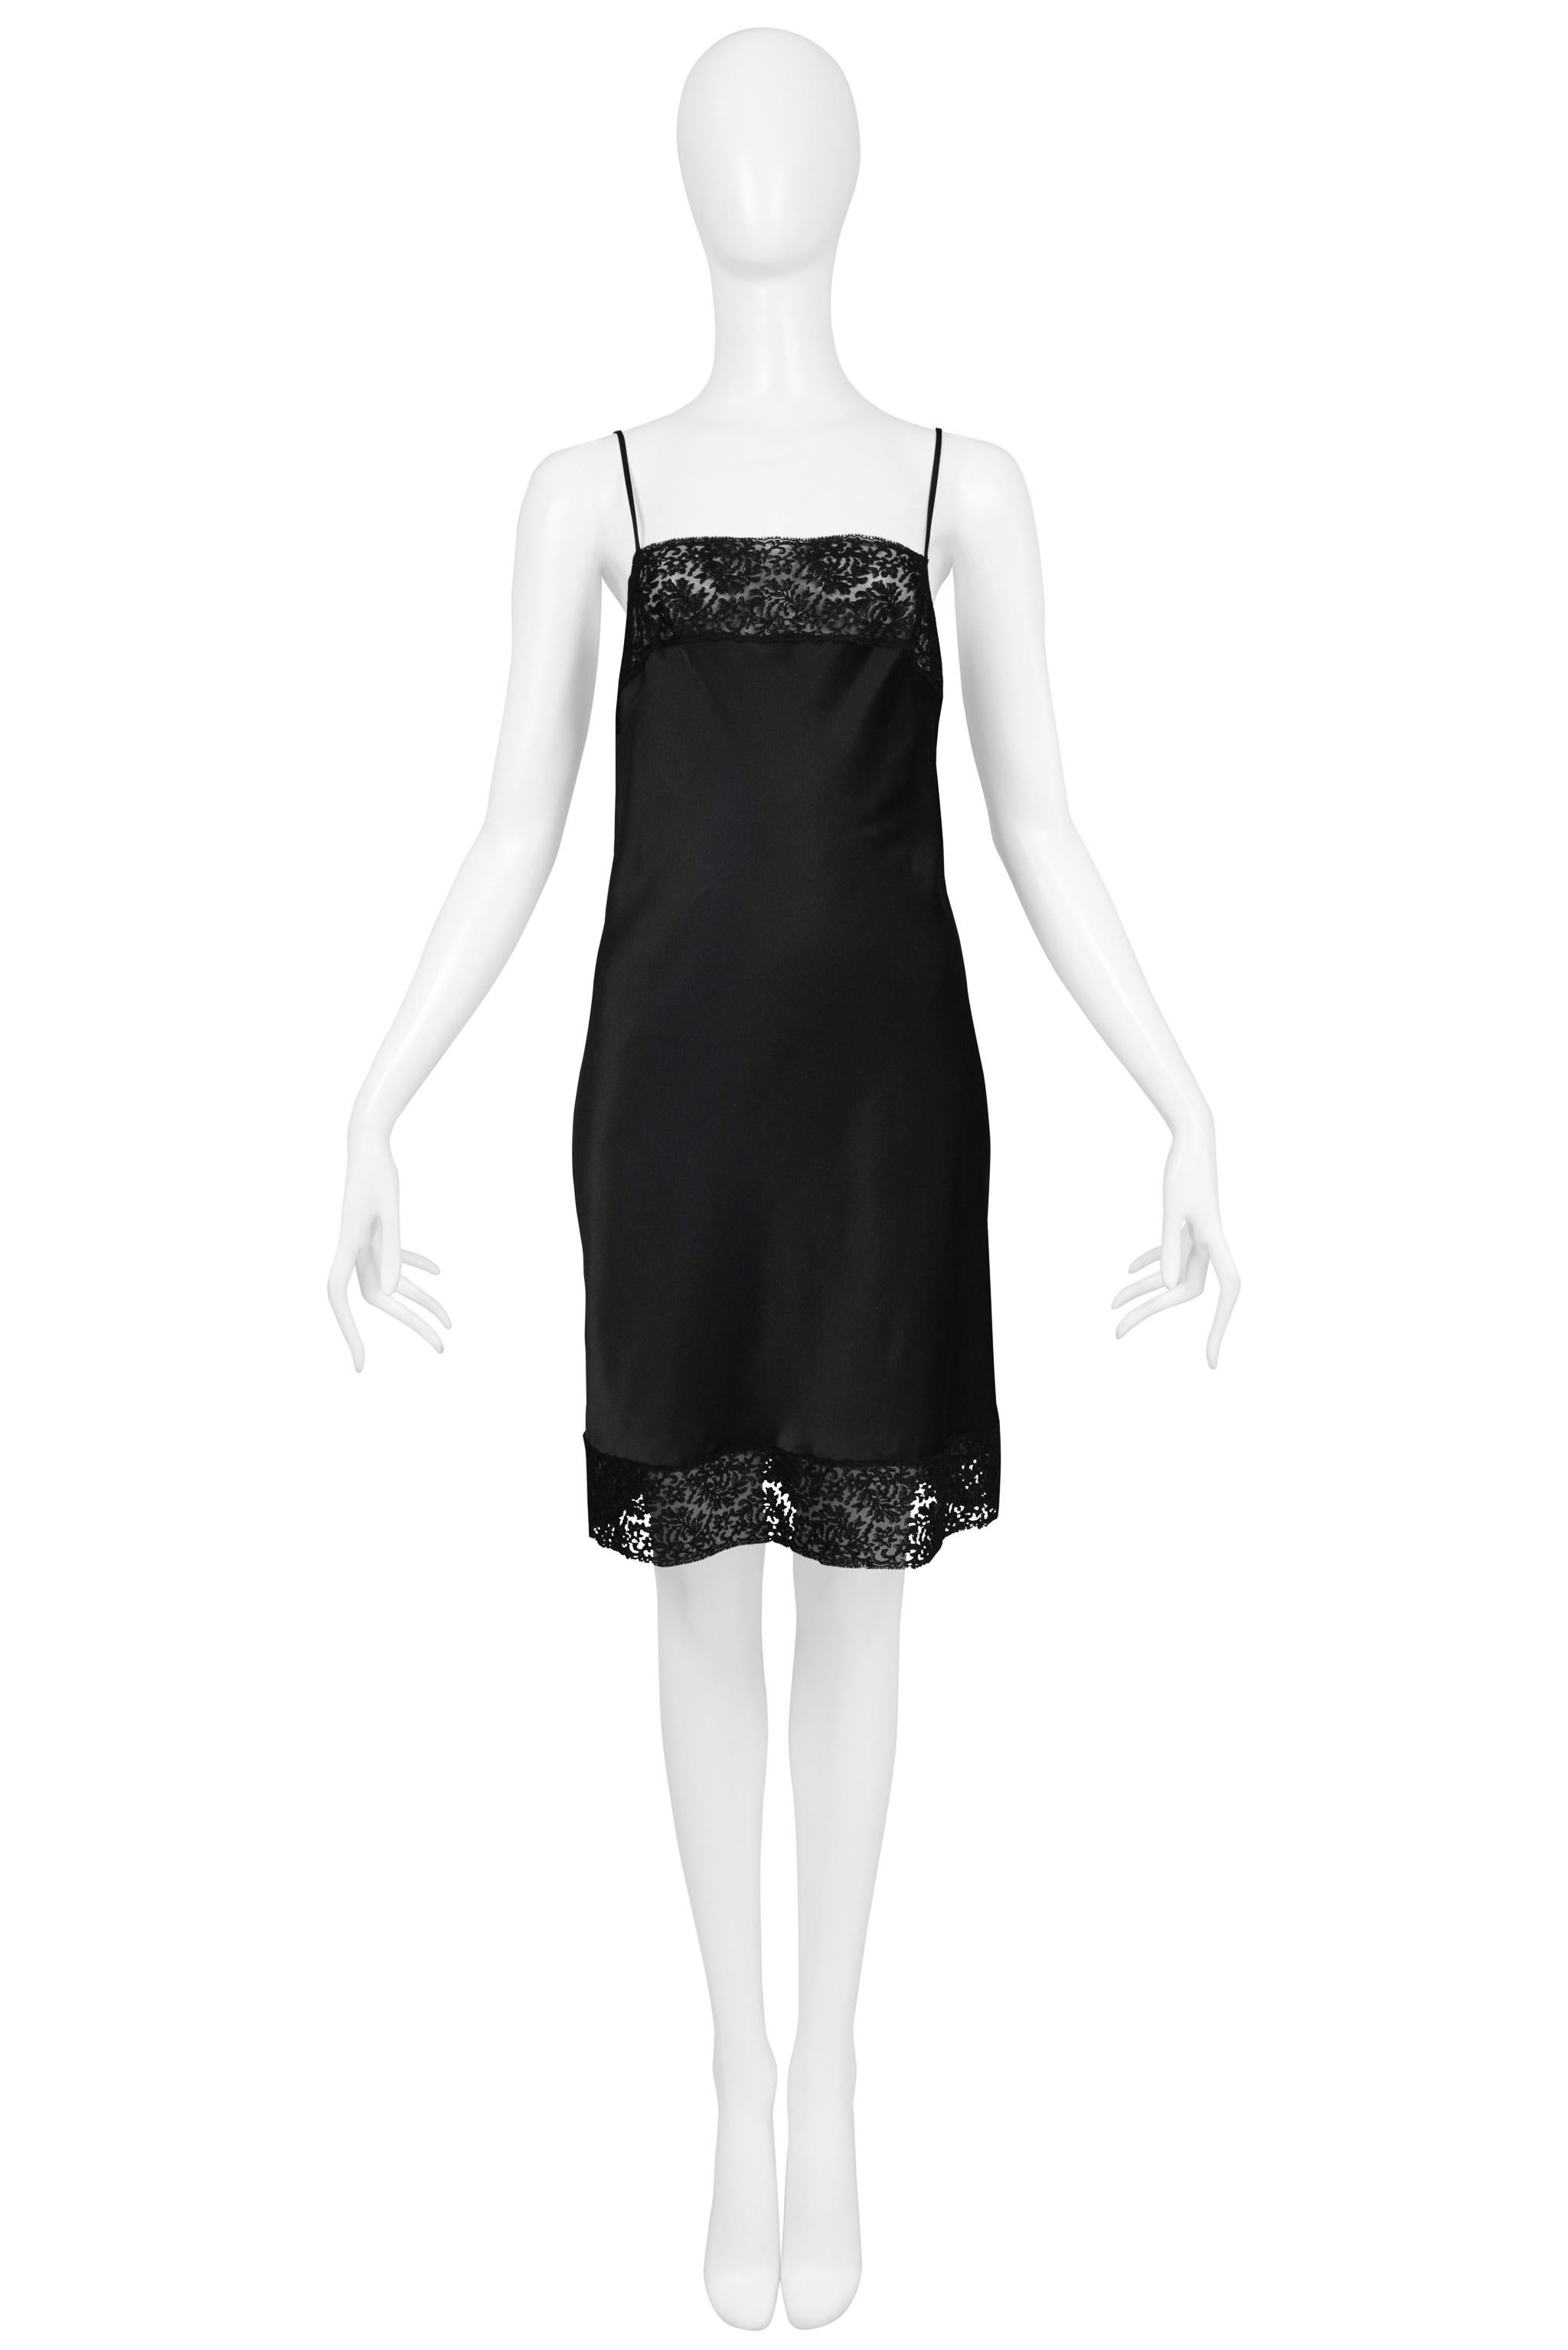 Christian Dior By John Galliano Black Silk And Lace Slip Dress 1997 For Sale 2